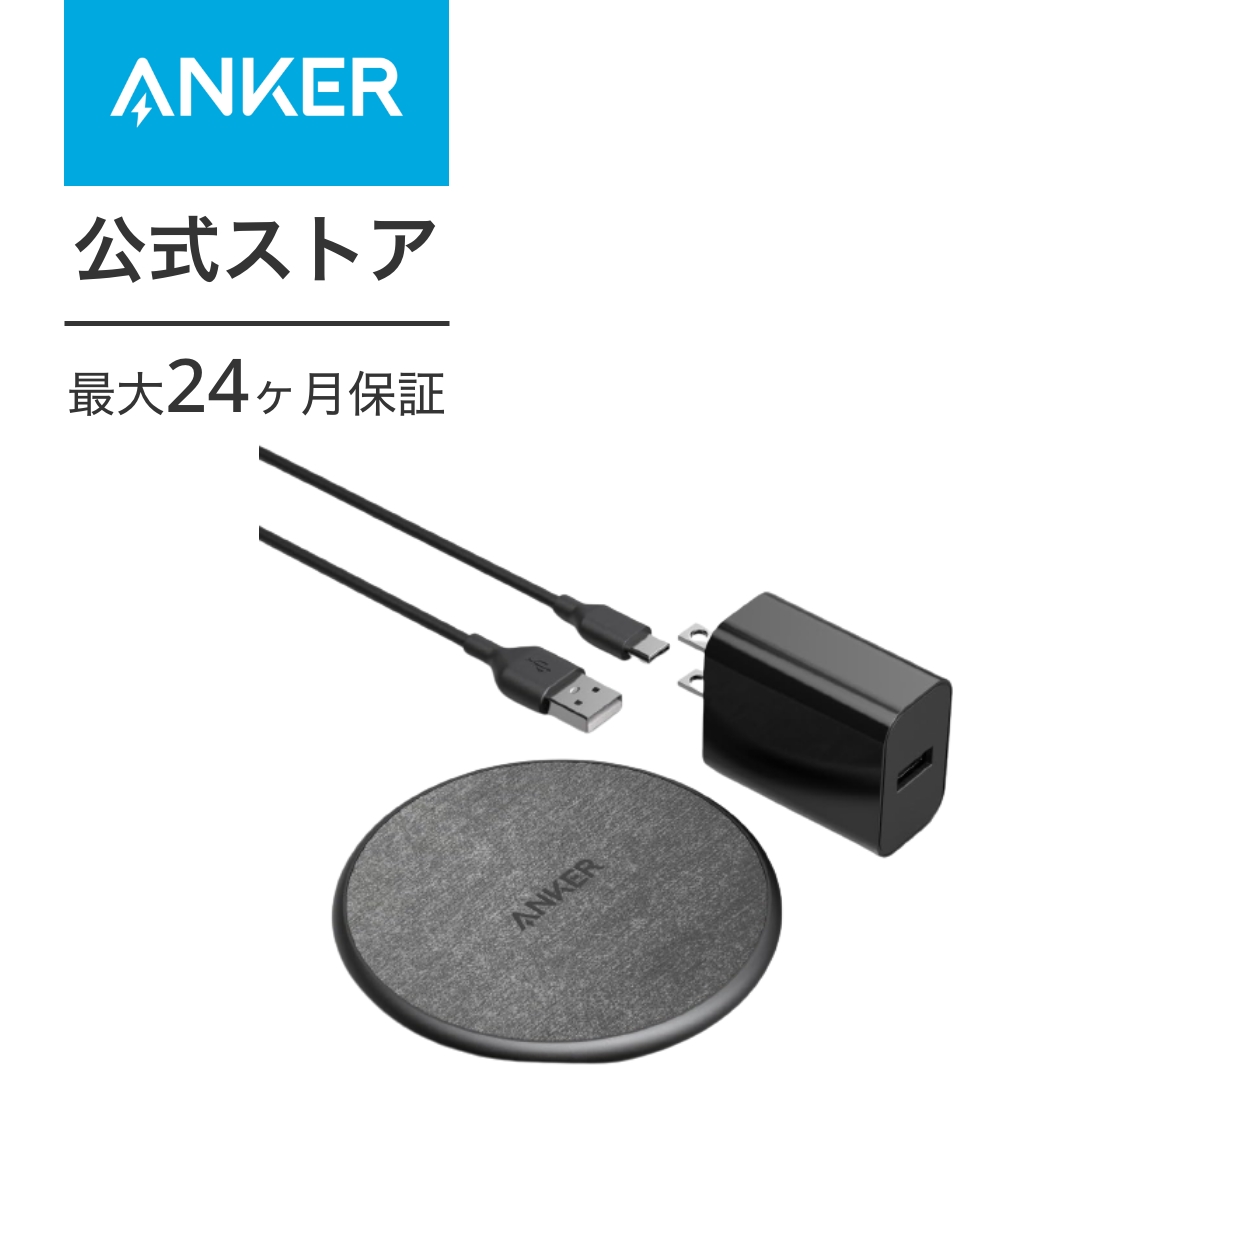 Anker 318 Wireless Charger （Pad） B2548NF1 （ブラック）の商品画像